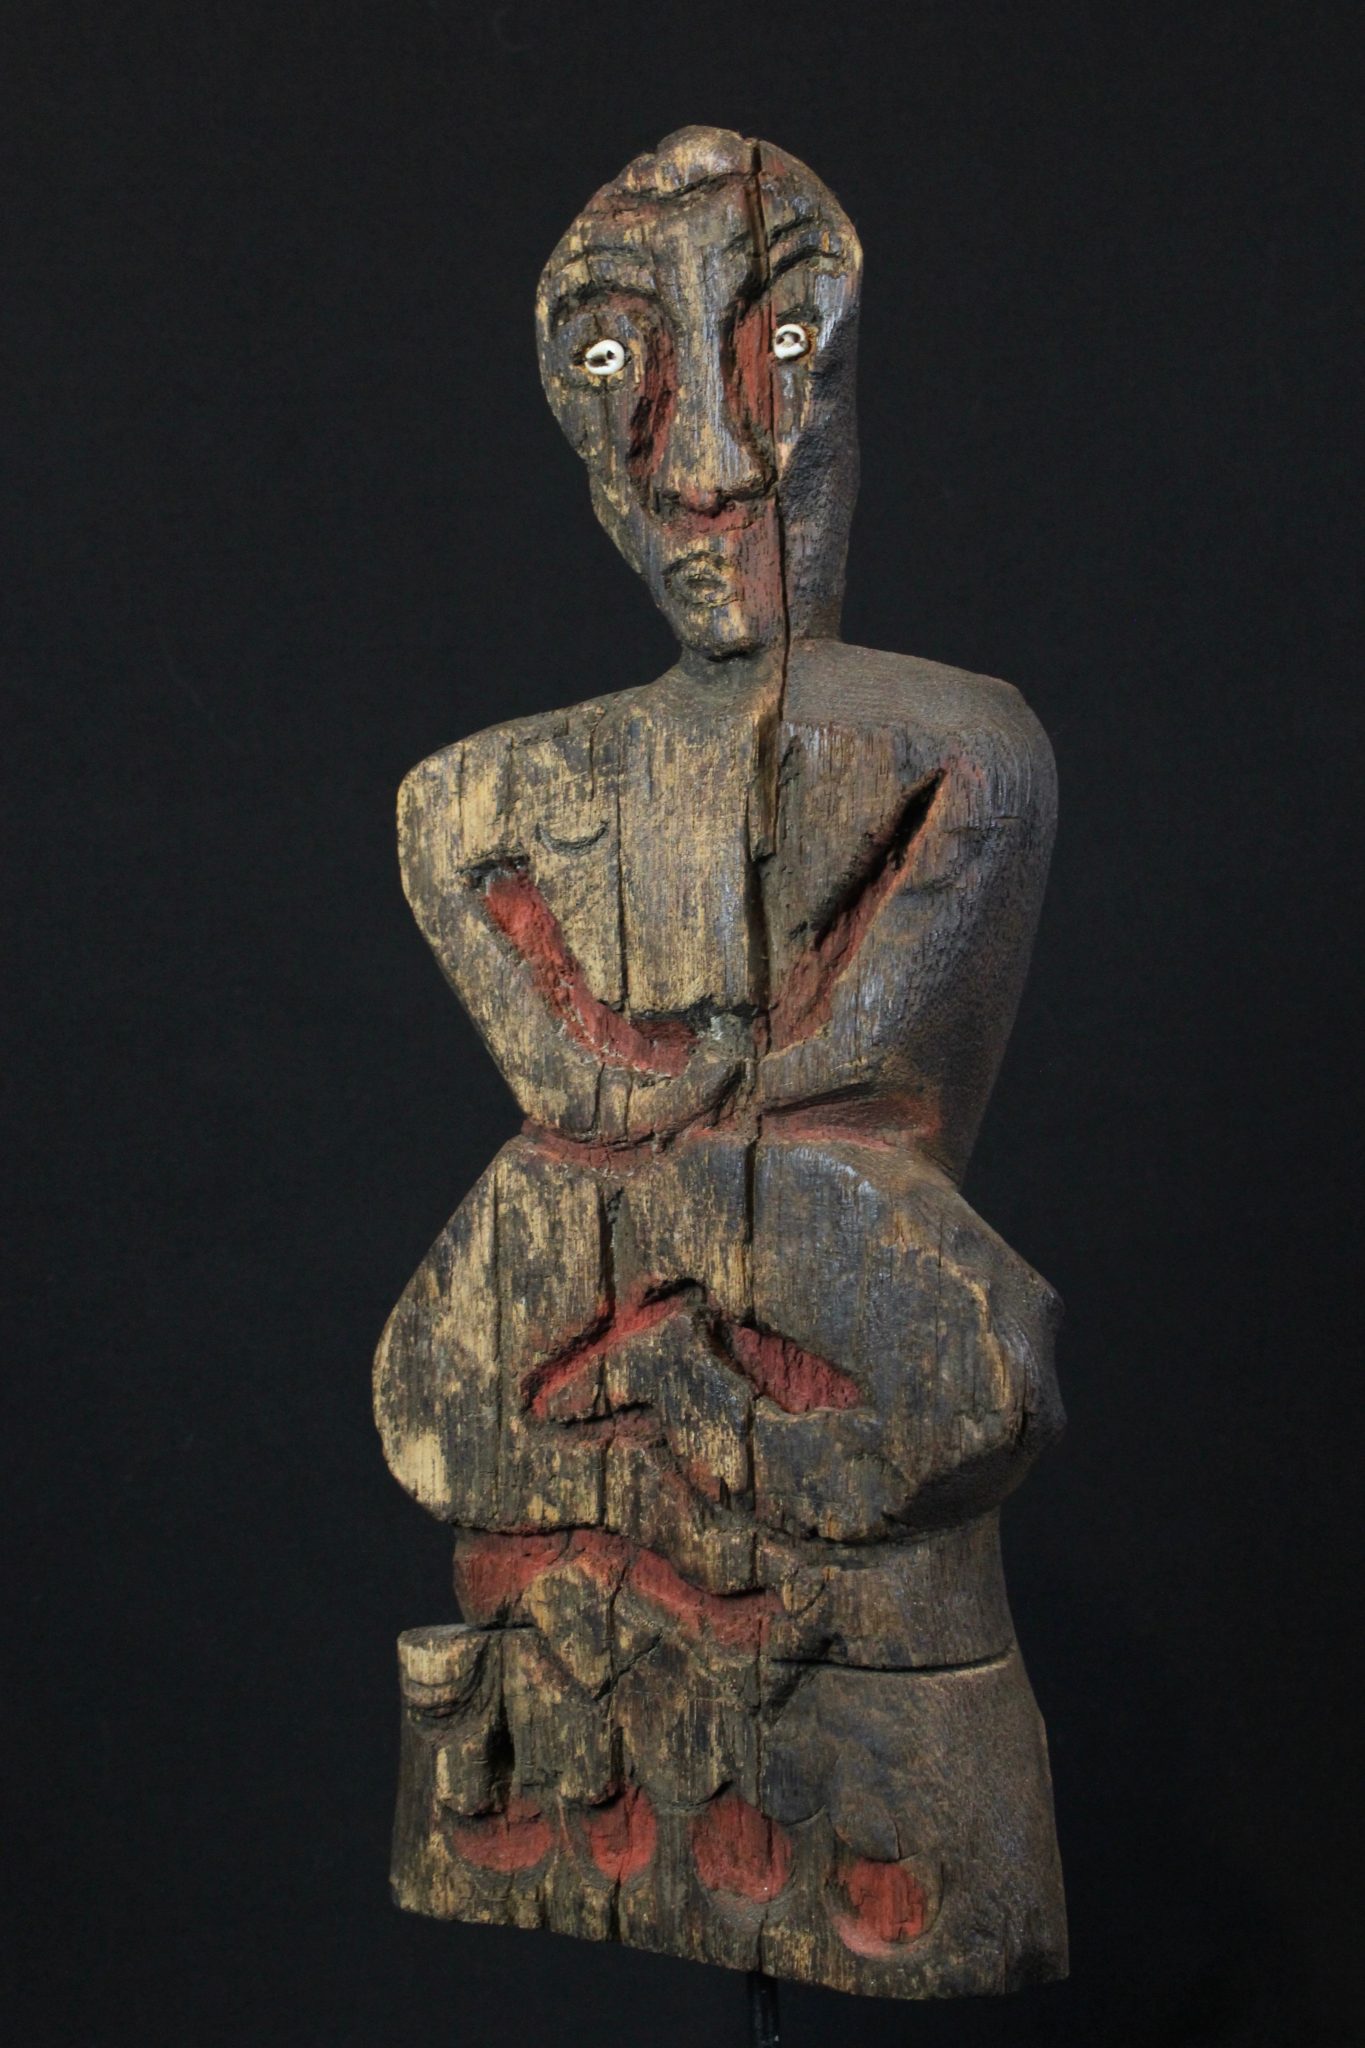 Shaman Effigy Figure, Nagaland, India, Naga tribe, Early 20th c, Wood, pigment, shell, Probably for calling spirits as well as for use in healing rituals There are 7 images on the back of creatures made by poking holes as an outline for each one. 14” x 5 ¾” x 2 ¾”, Sold